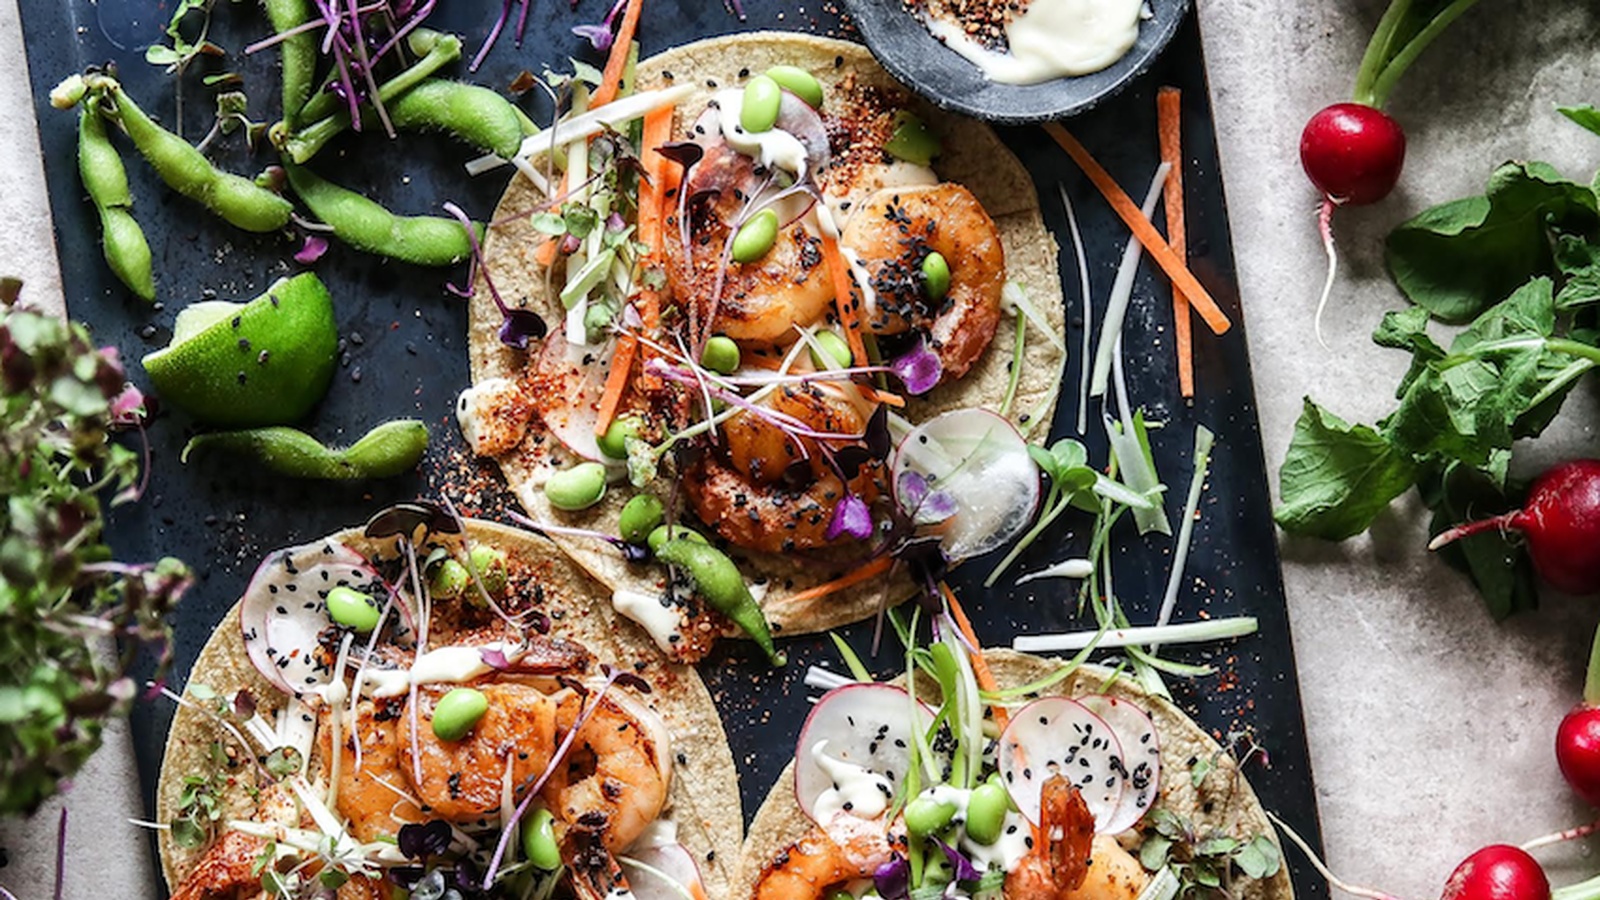 Miso and Ginger Prawn Tacos